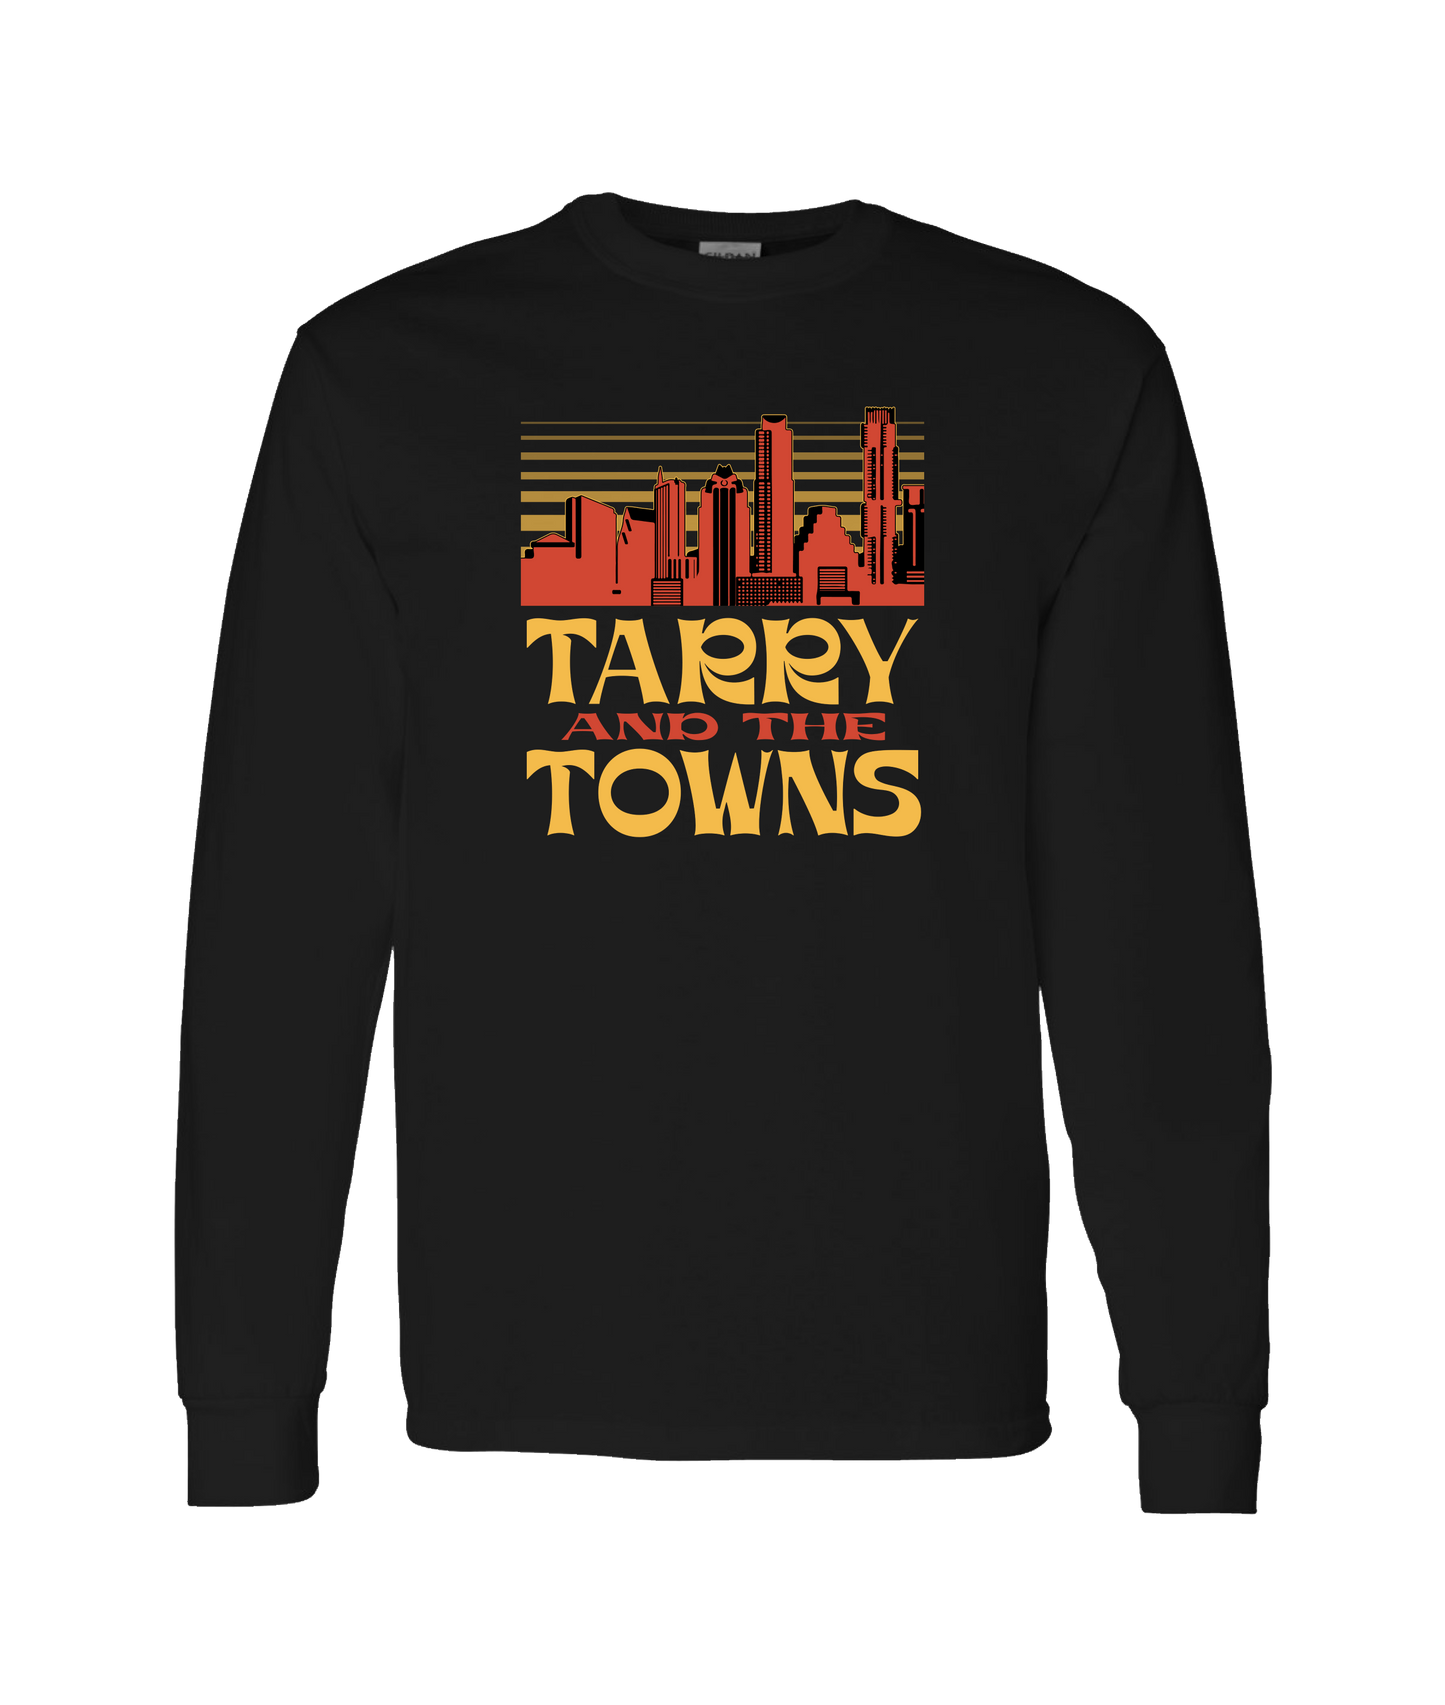 Tarry and the Towns - The 70's - Black Long Sleeve T